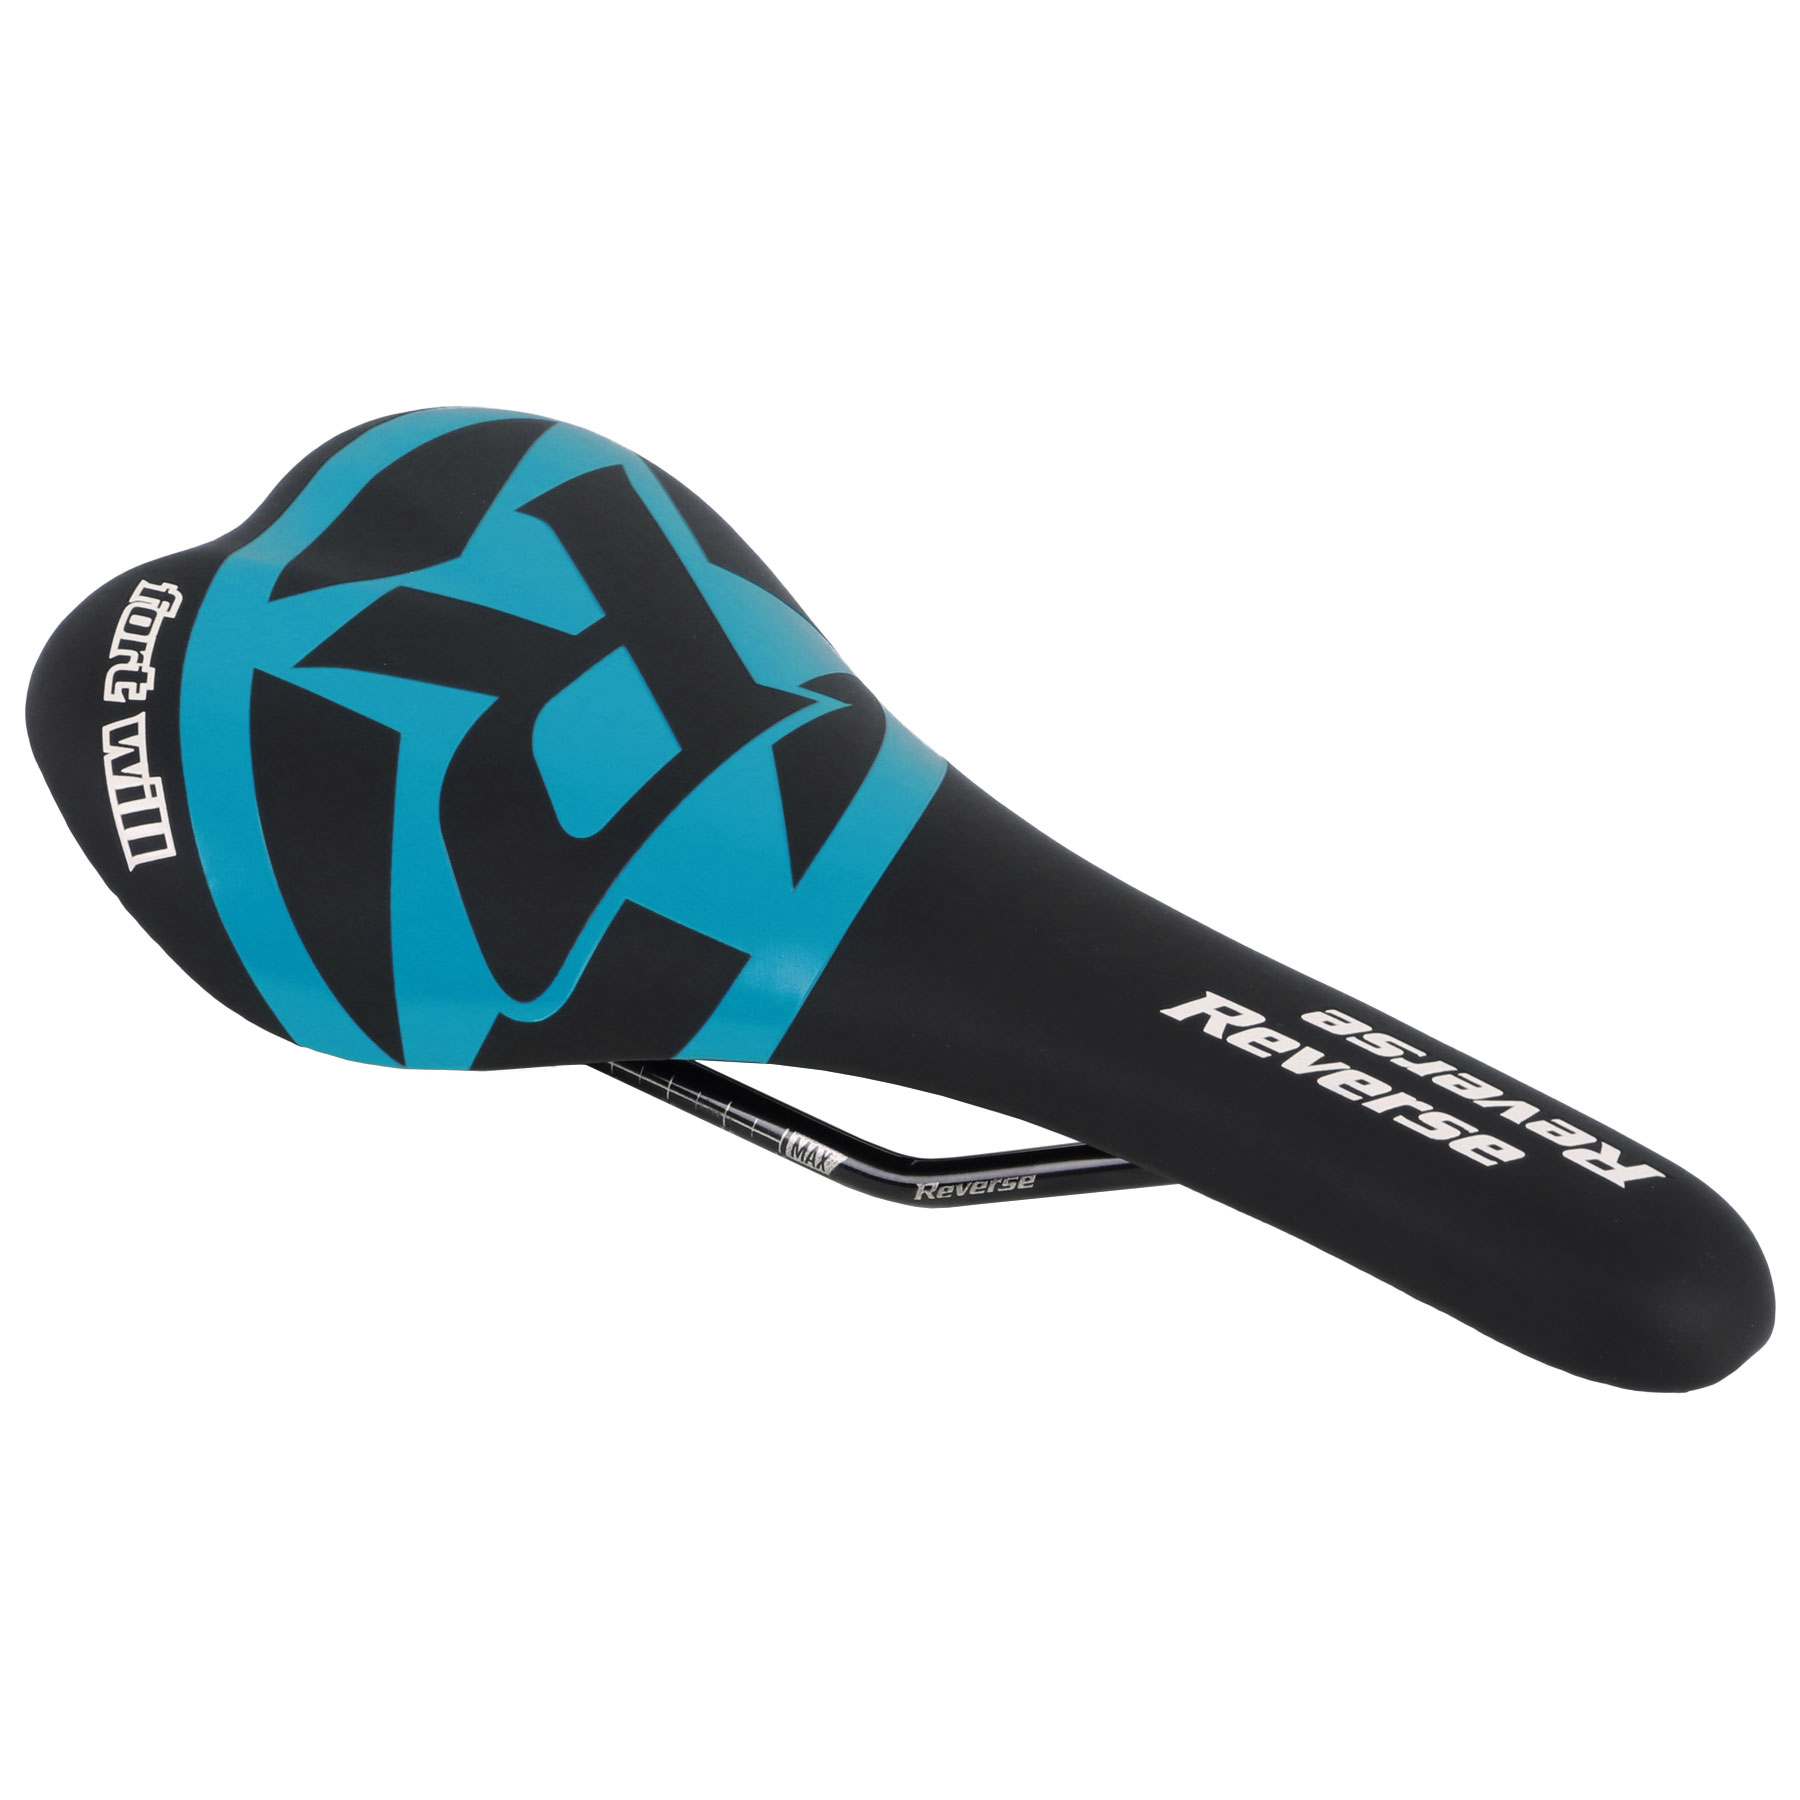 Productfoto van Reverse Components Fort Will Saddle CrMo Style - black / light blue